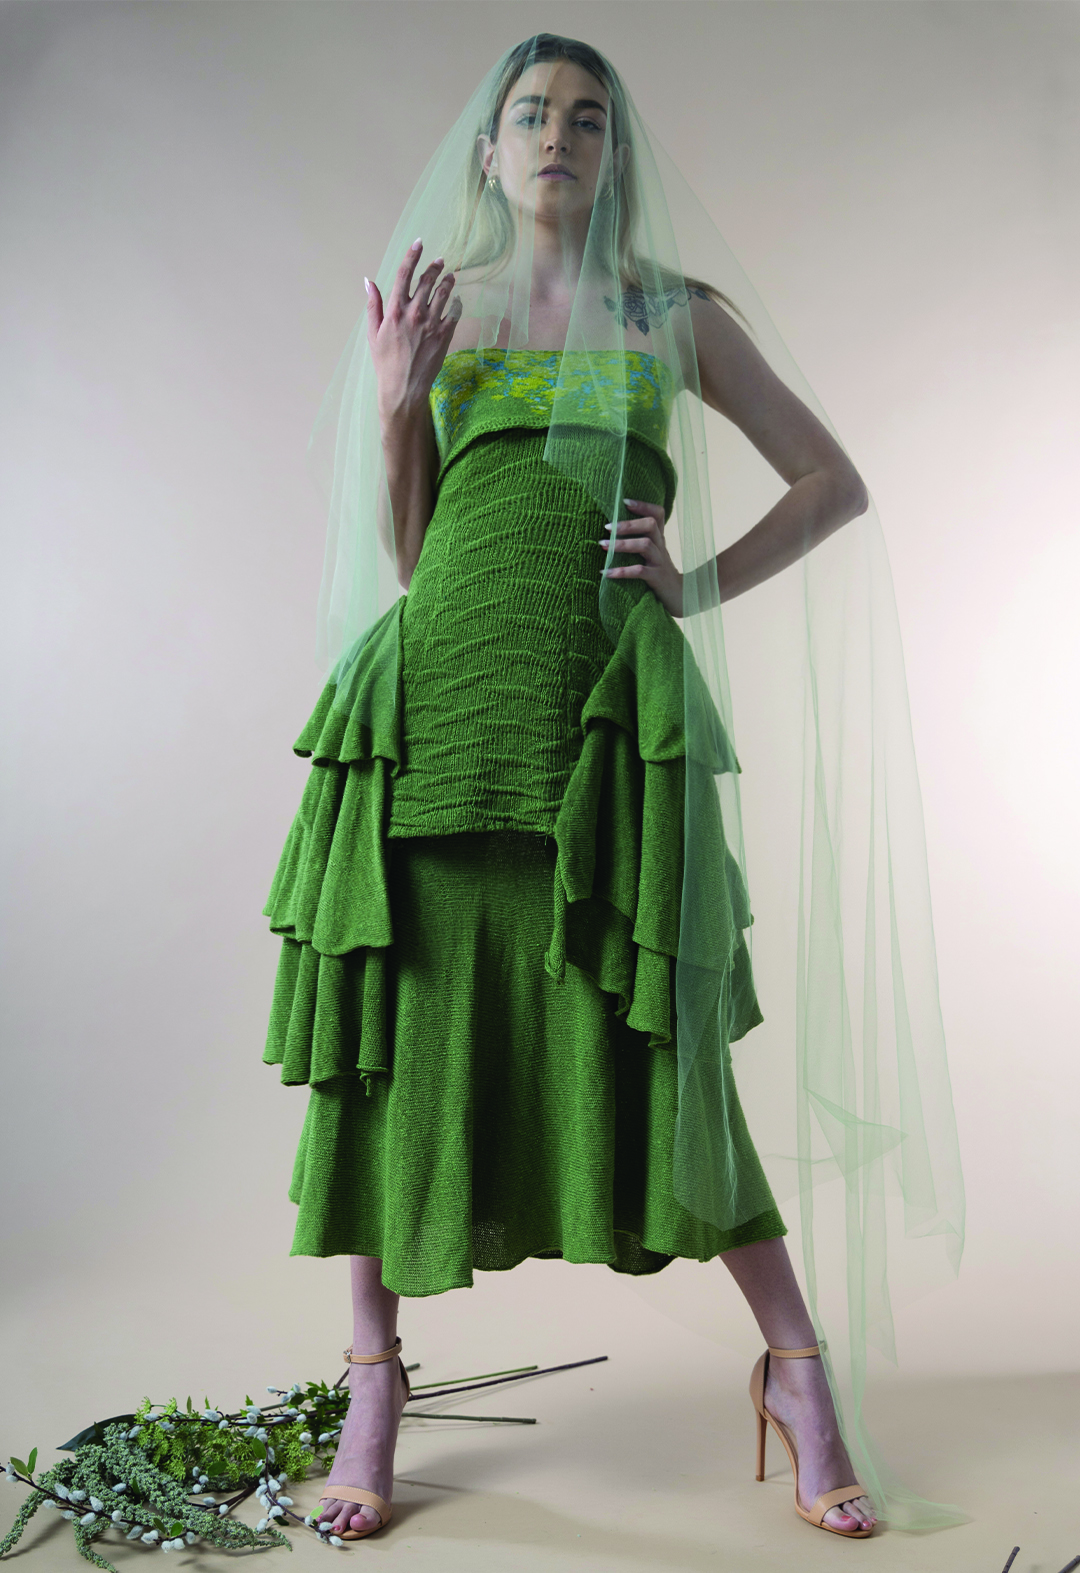 A female model is posed in a front view in a midtone green gown with a tube top, bumpy textured bodice, and layers of flare skirts attached in different lengths on each side.